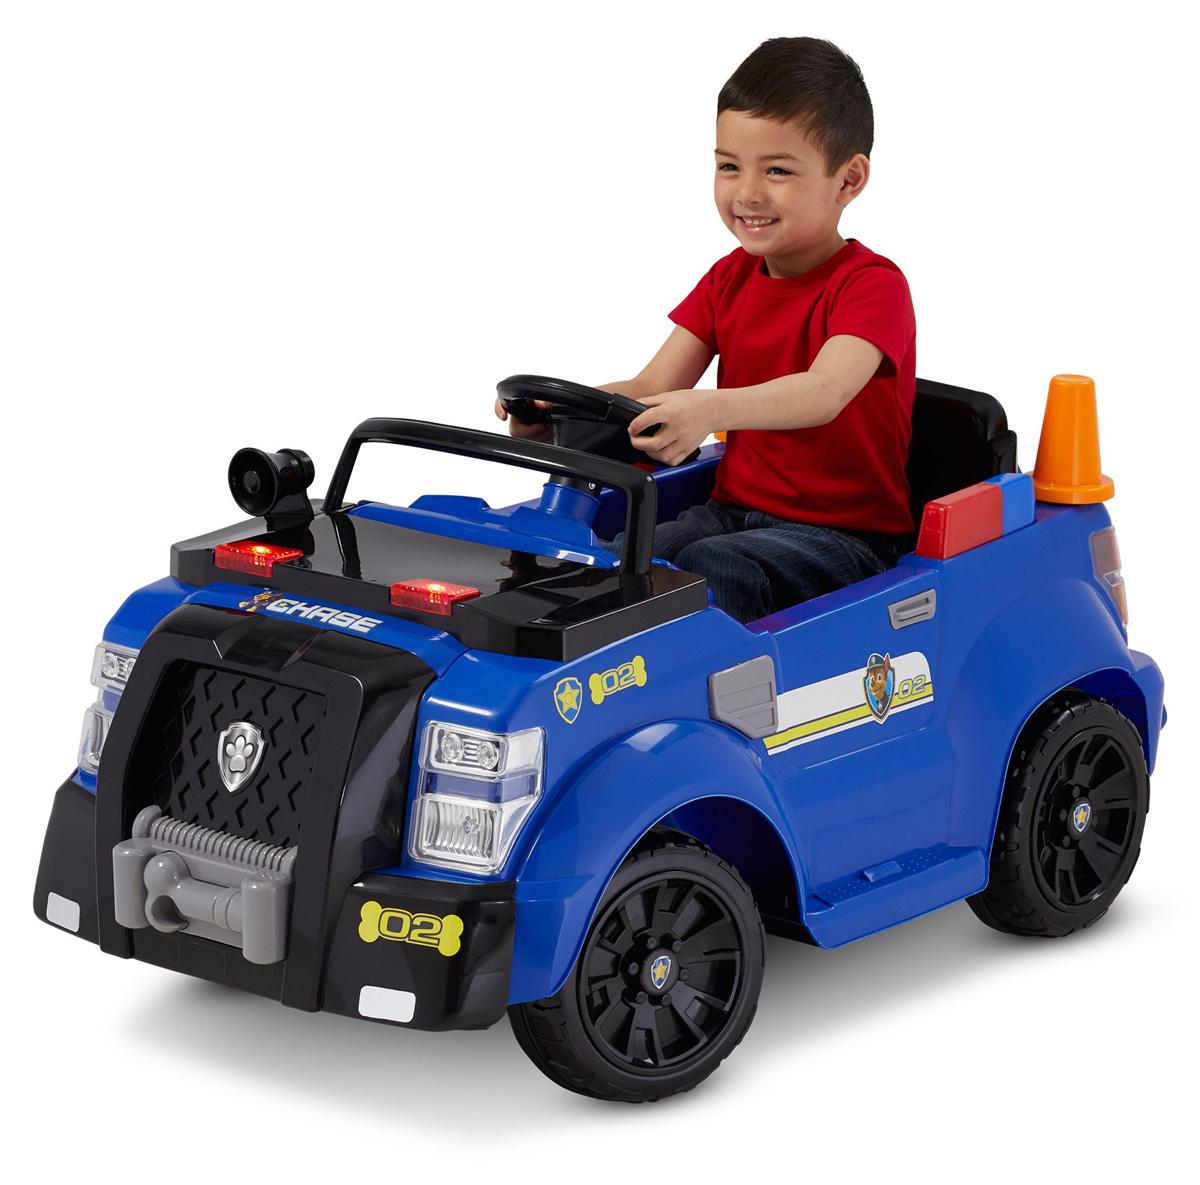 PAW Patrol 6-Volt Ride-On Toys for $78 Shipped